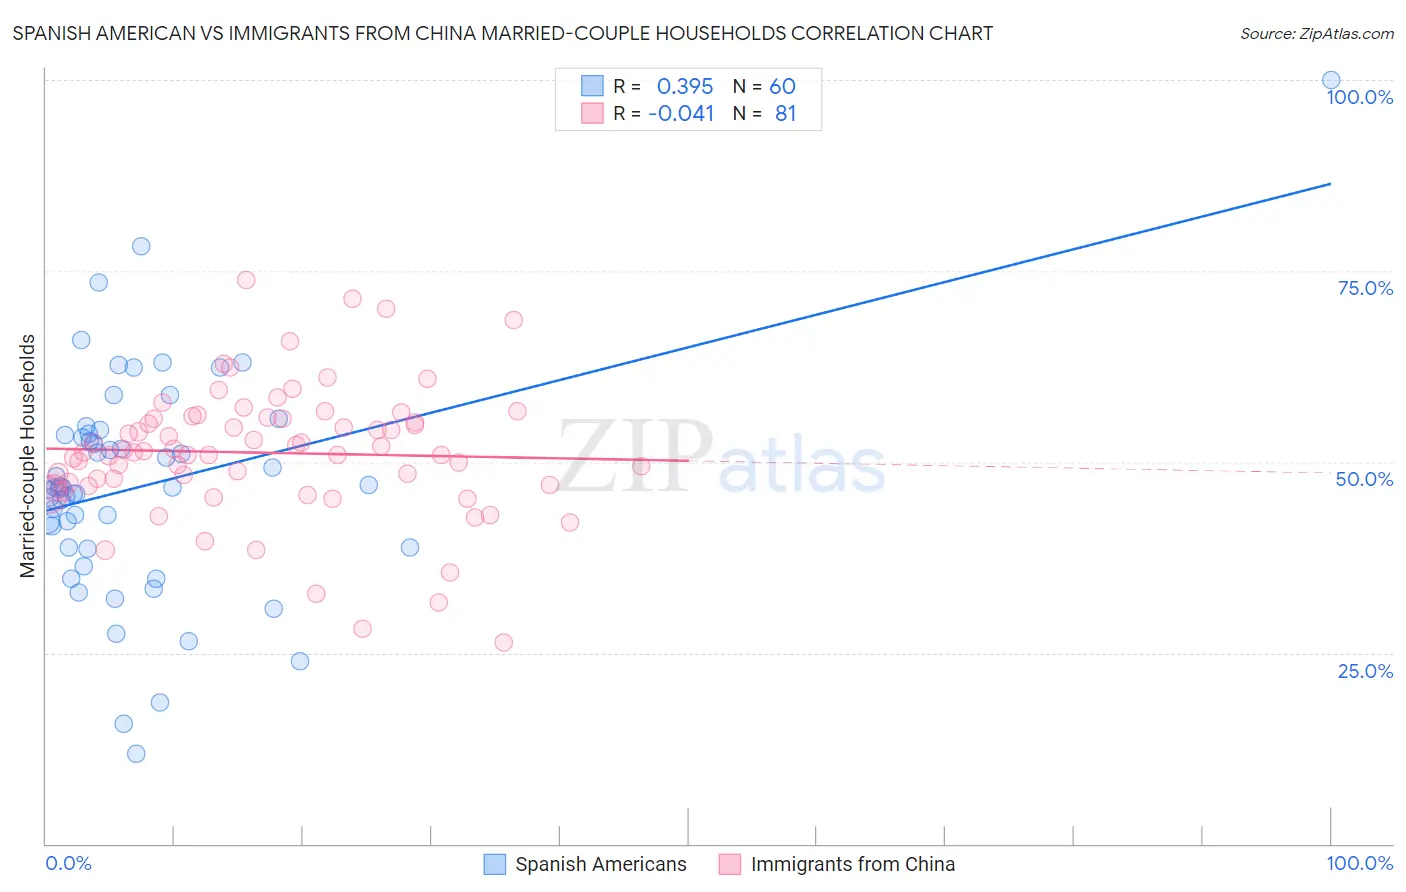 Spanish American vs Immigrants from China Married-couple Households